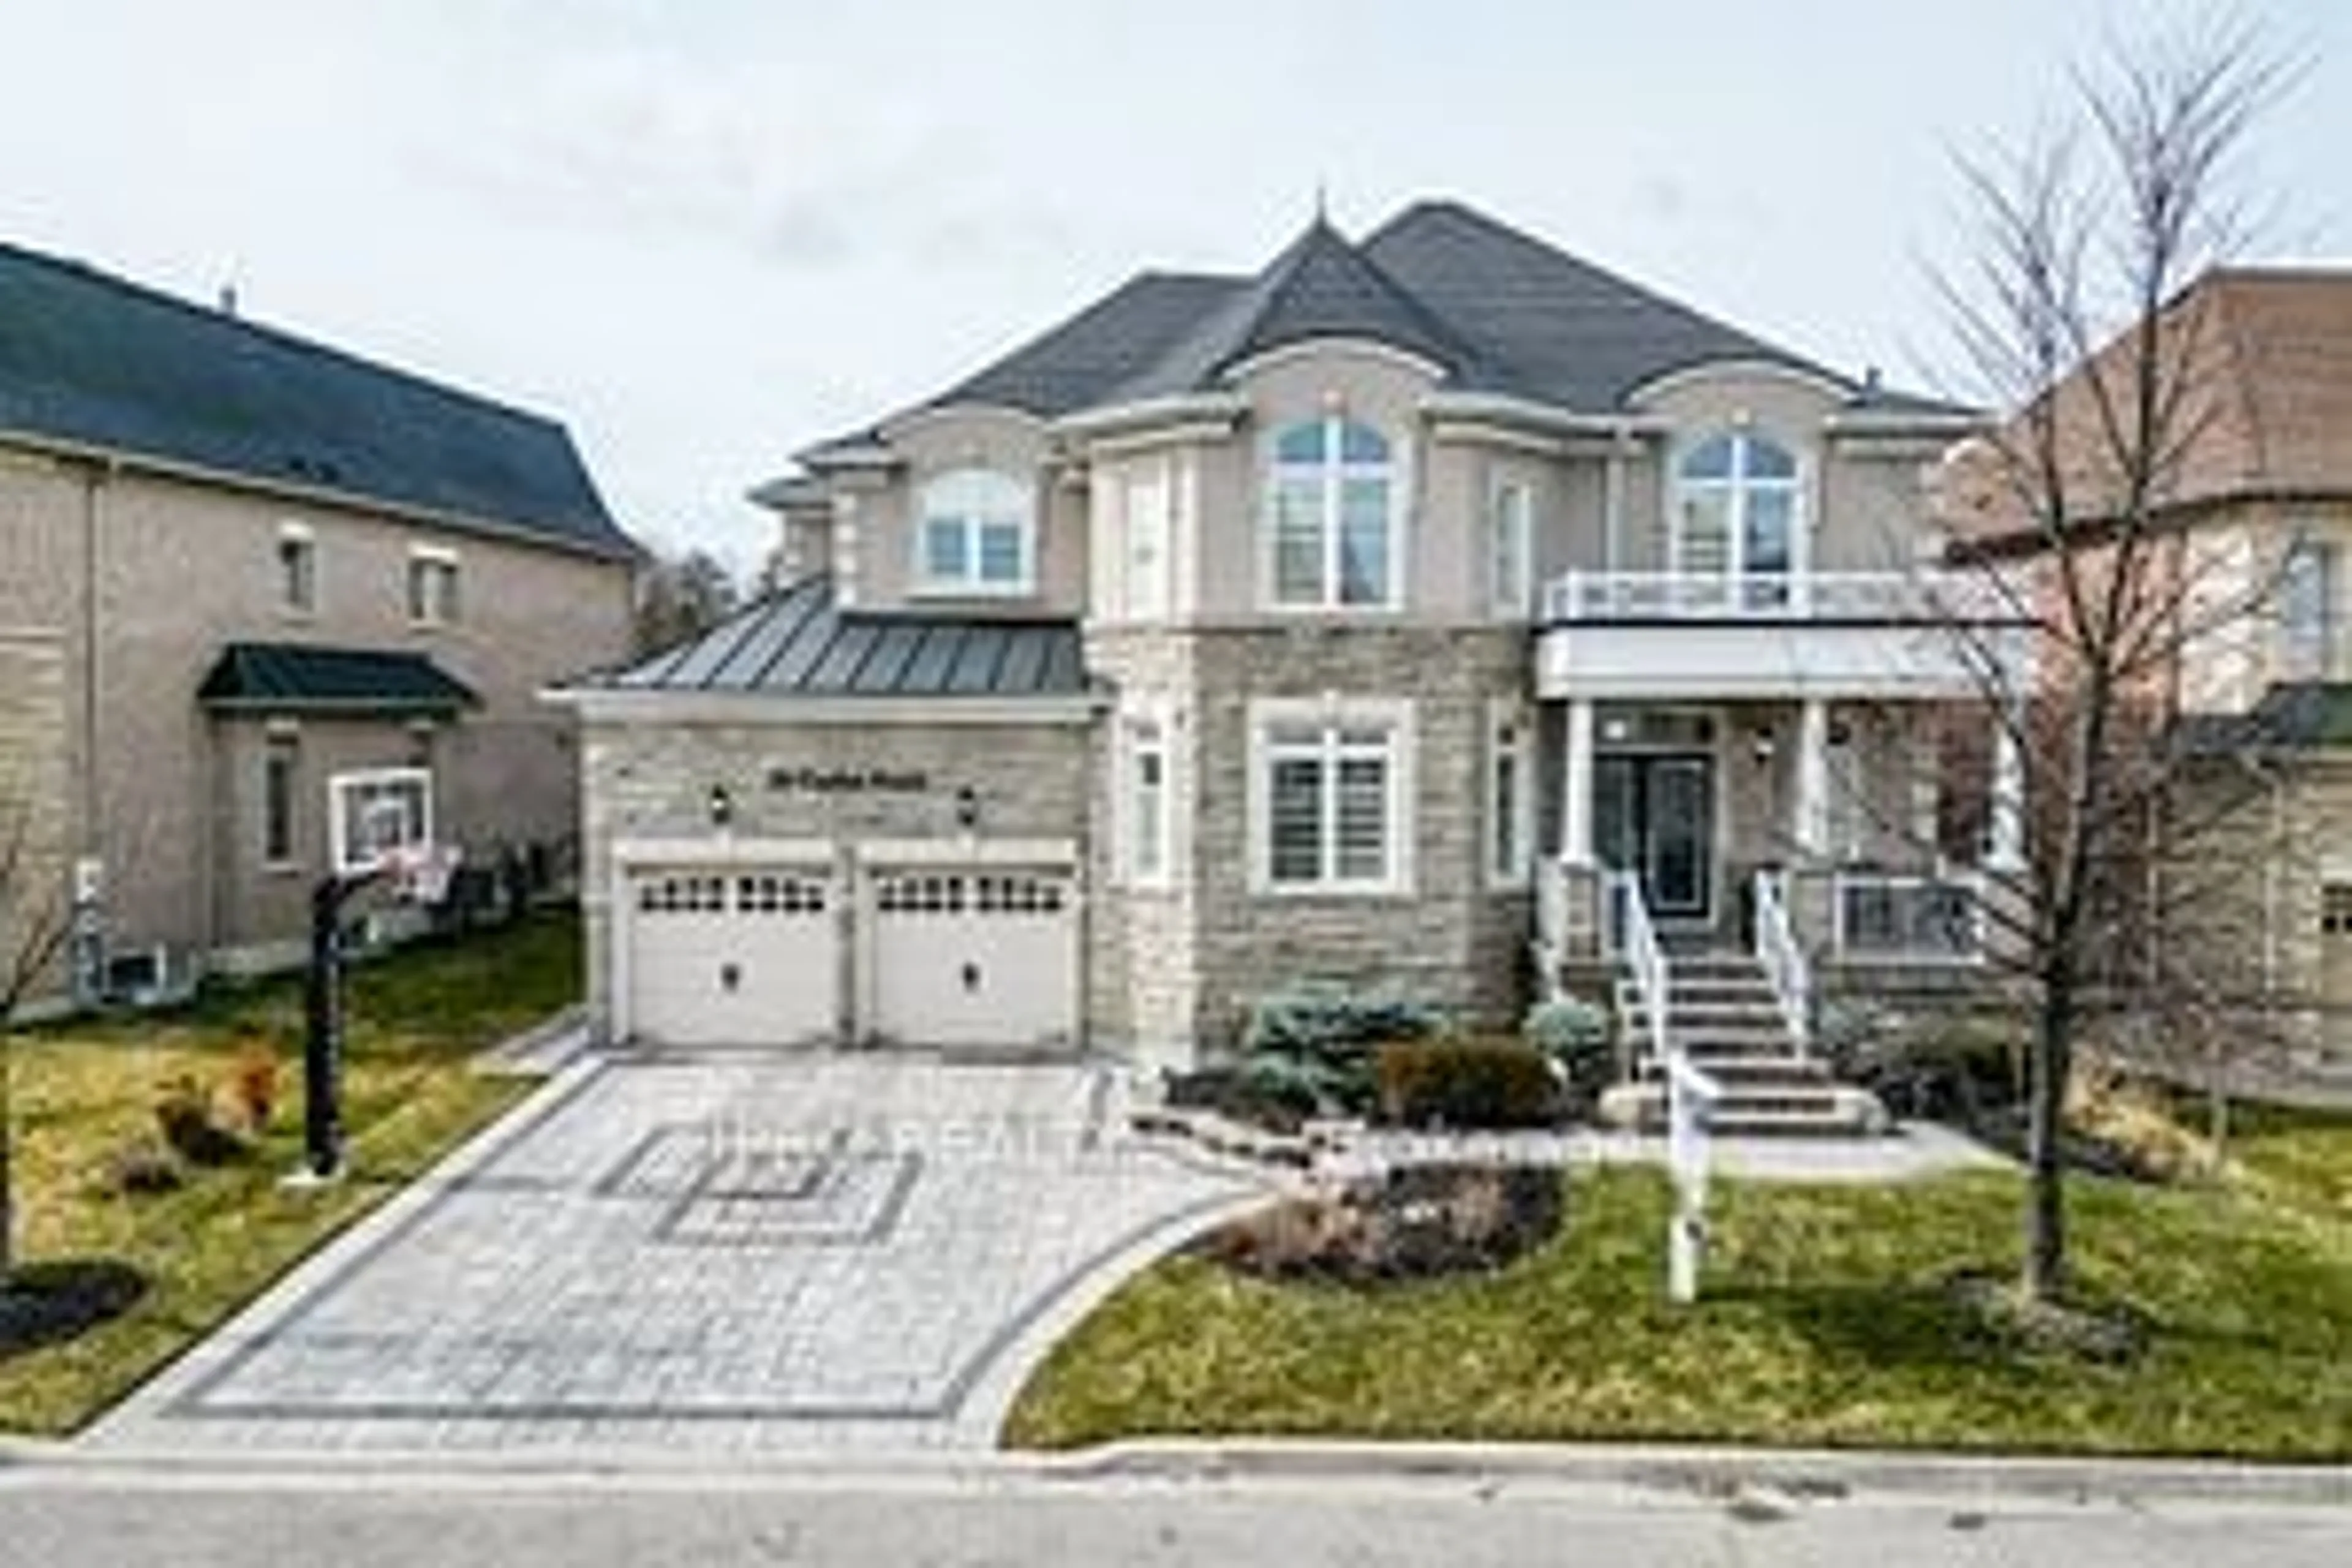 Home with brick exterior material for 36 Cachet Crt, Brampton Ontario L6X 0X2